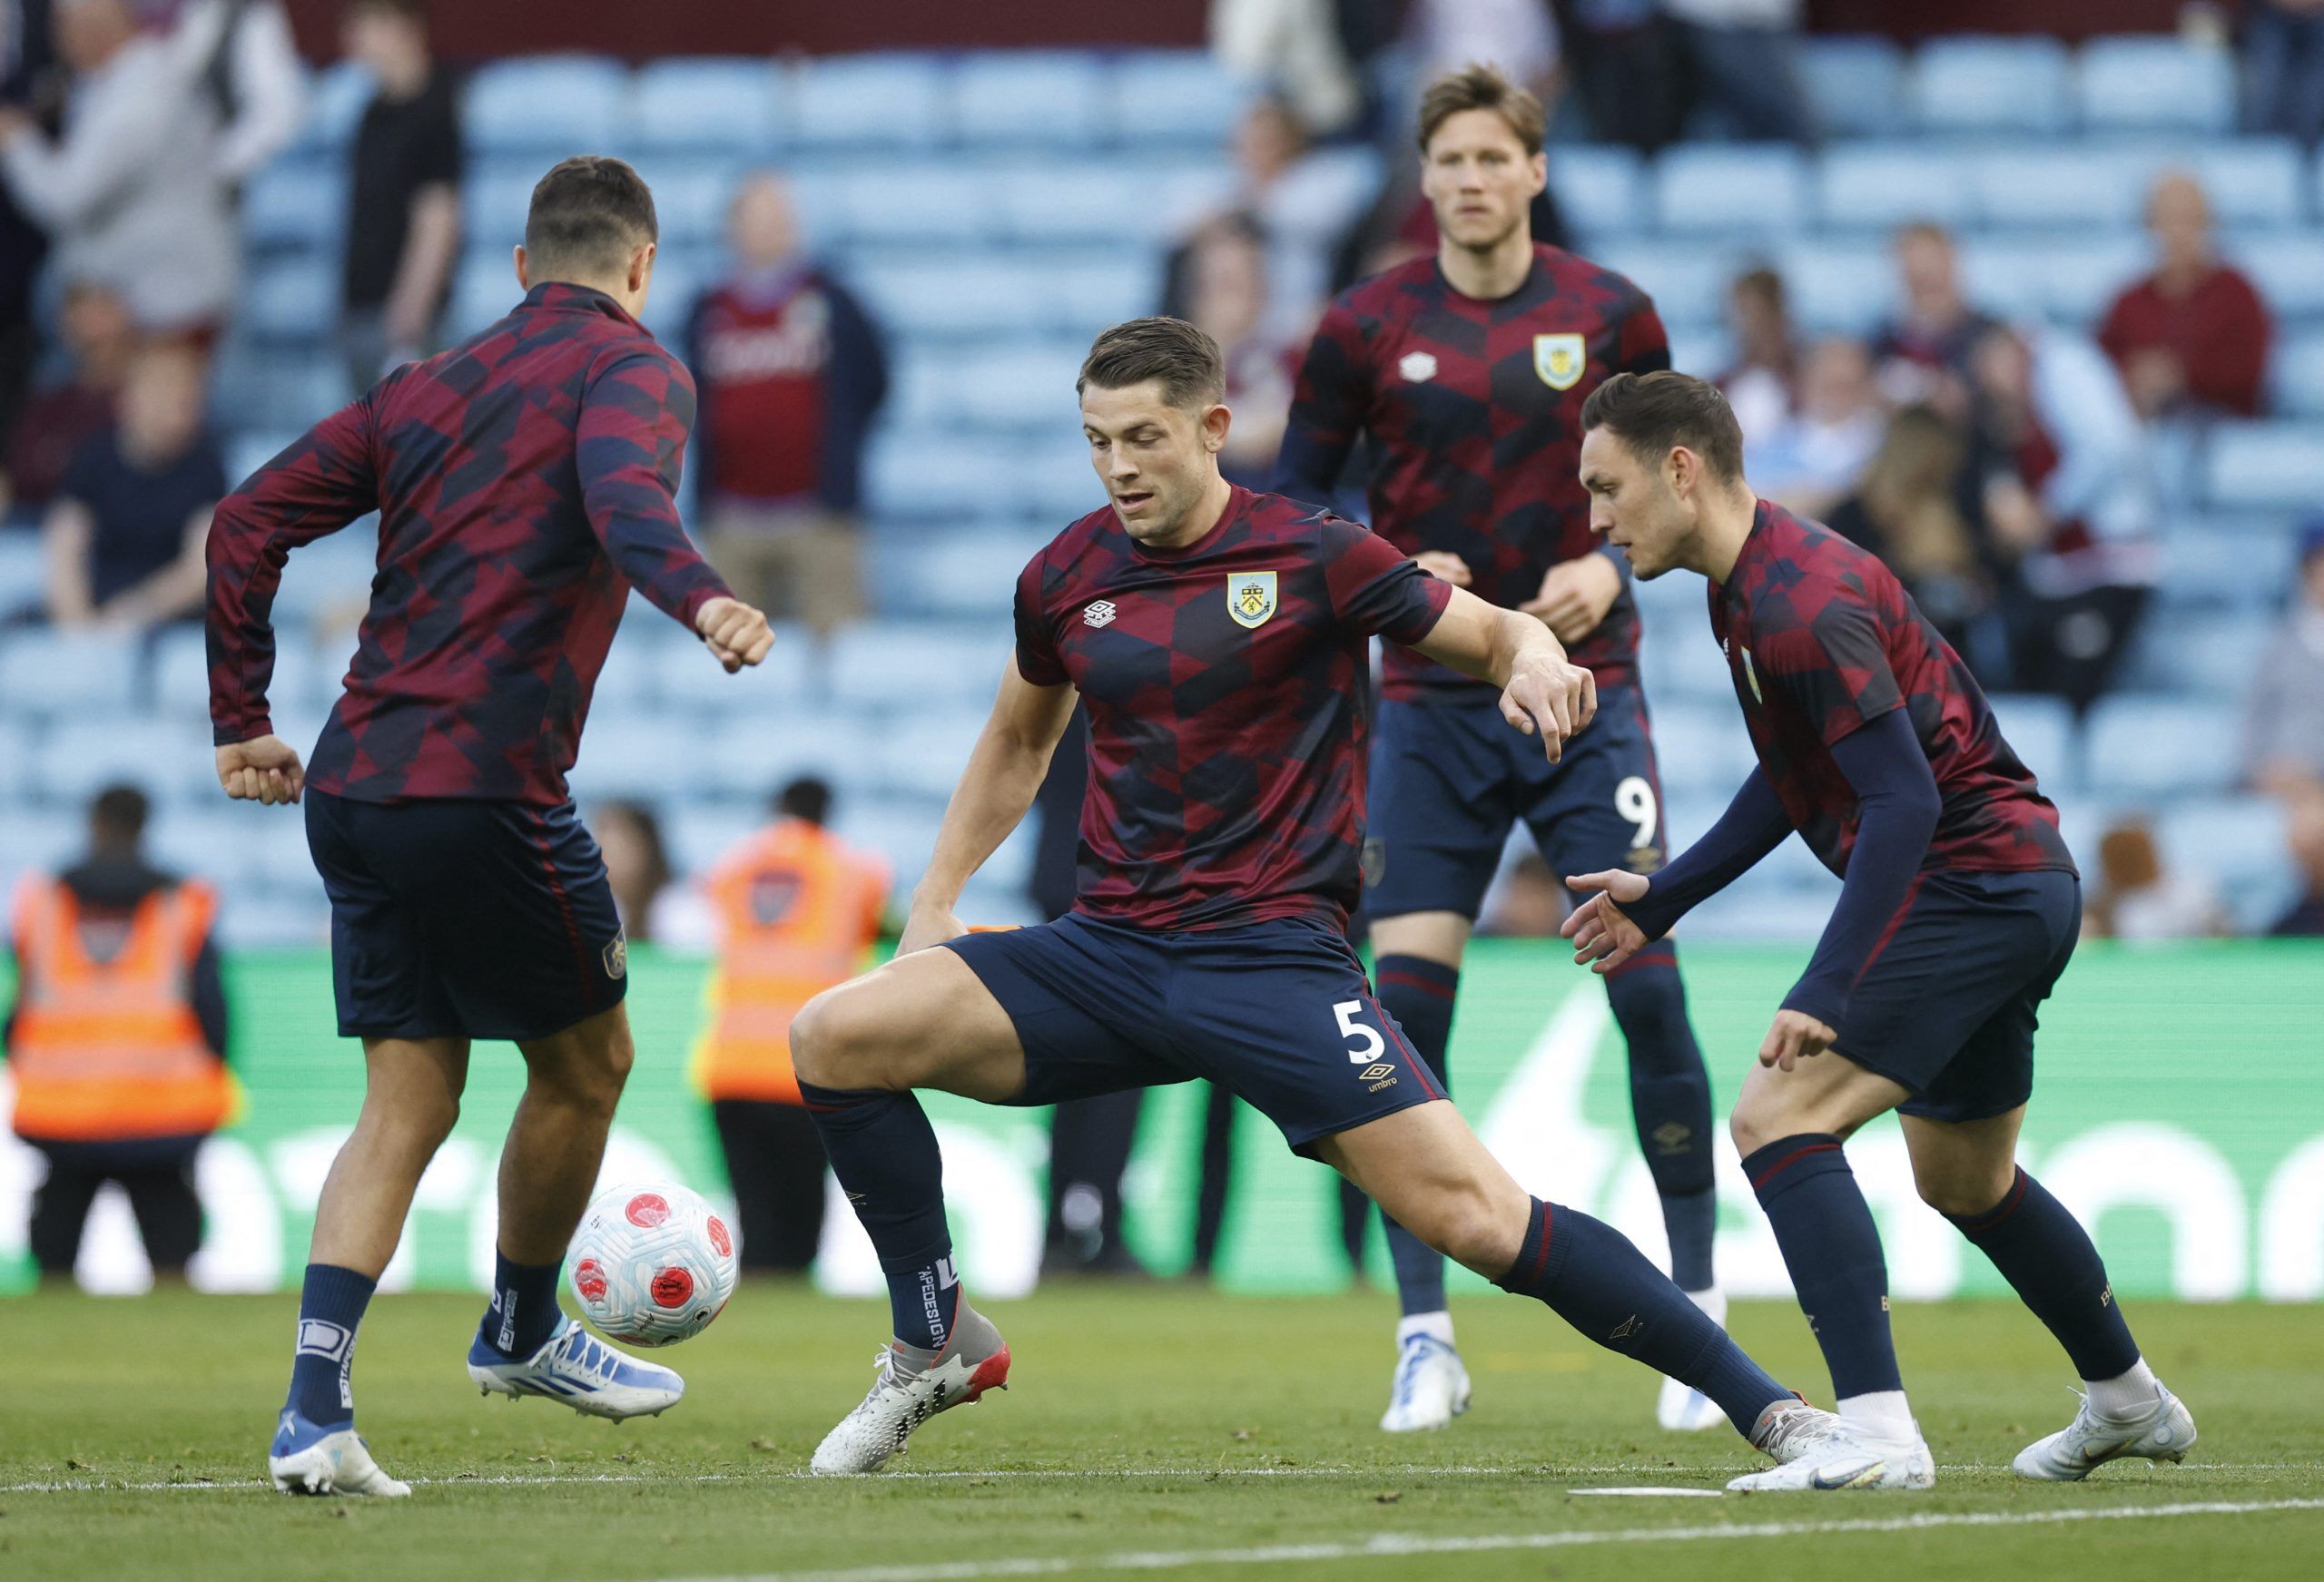 Soccer Football - Premier League - Aston Villa v Burnley - Villa Park, Birmingham, Britain - May 19, 2022 Burnley's James Tarkowski  with teammates during the warm up before the match Action Images via Reuters/Peter Cziborra EDITORIAL USE ONLY. No use with unauthorized audio, video, data, fixture lists, club/league logos or 'live' services. Online in-match use limited to 75 images, no video emulation. No use in betting, games or single club /league/player publications.  Please contact your accou